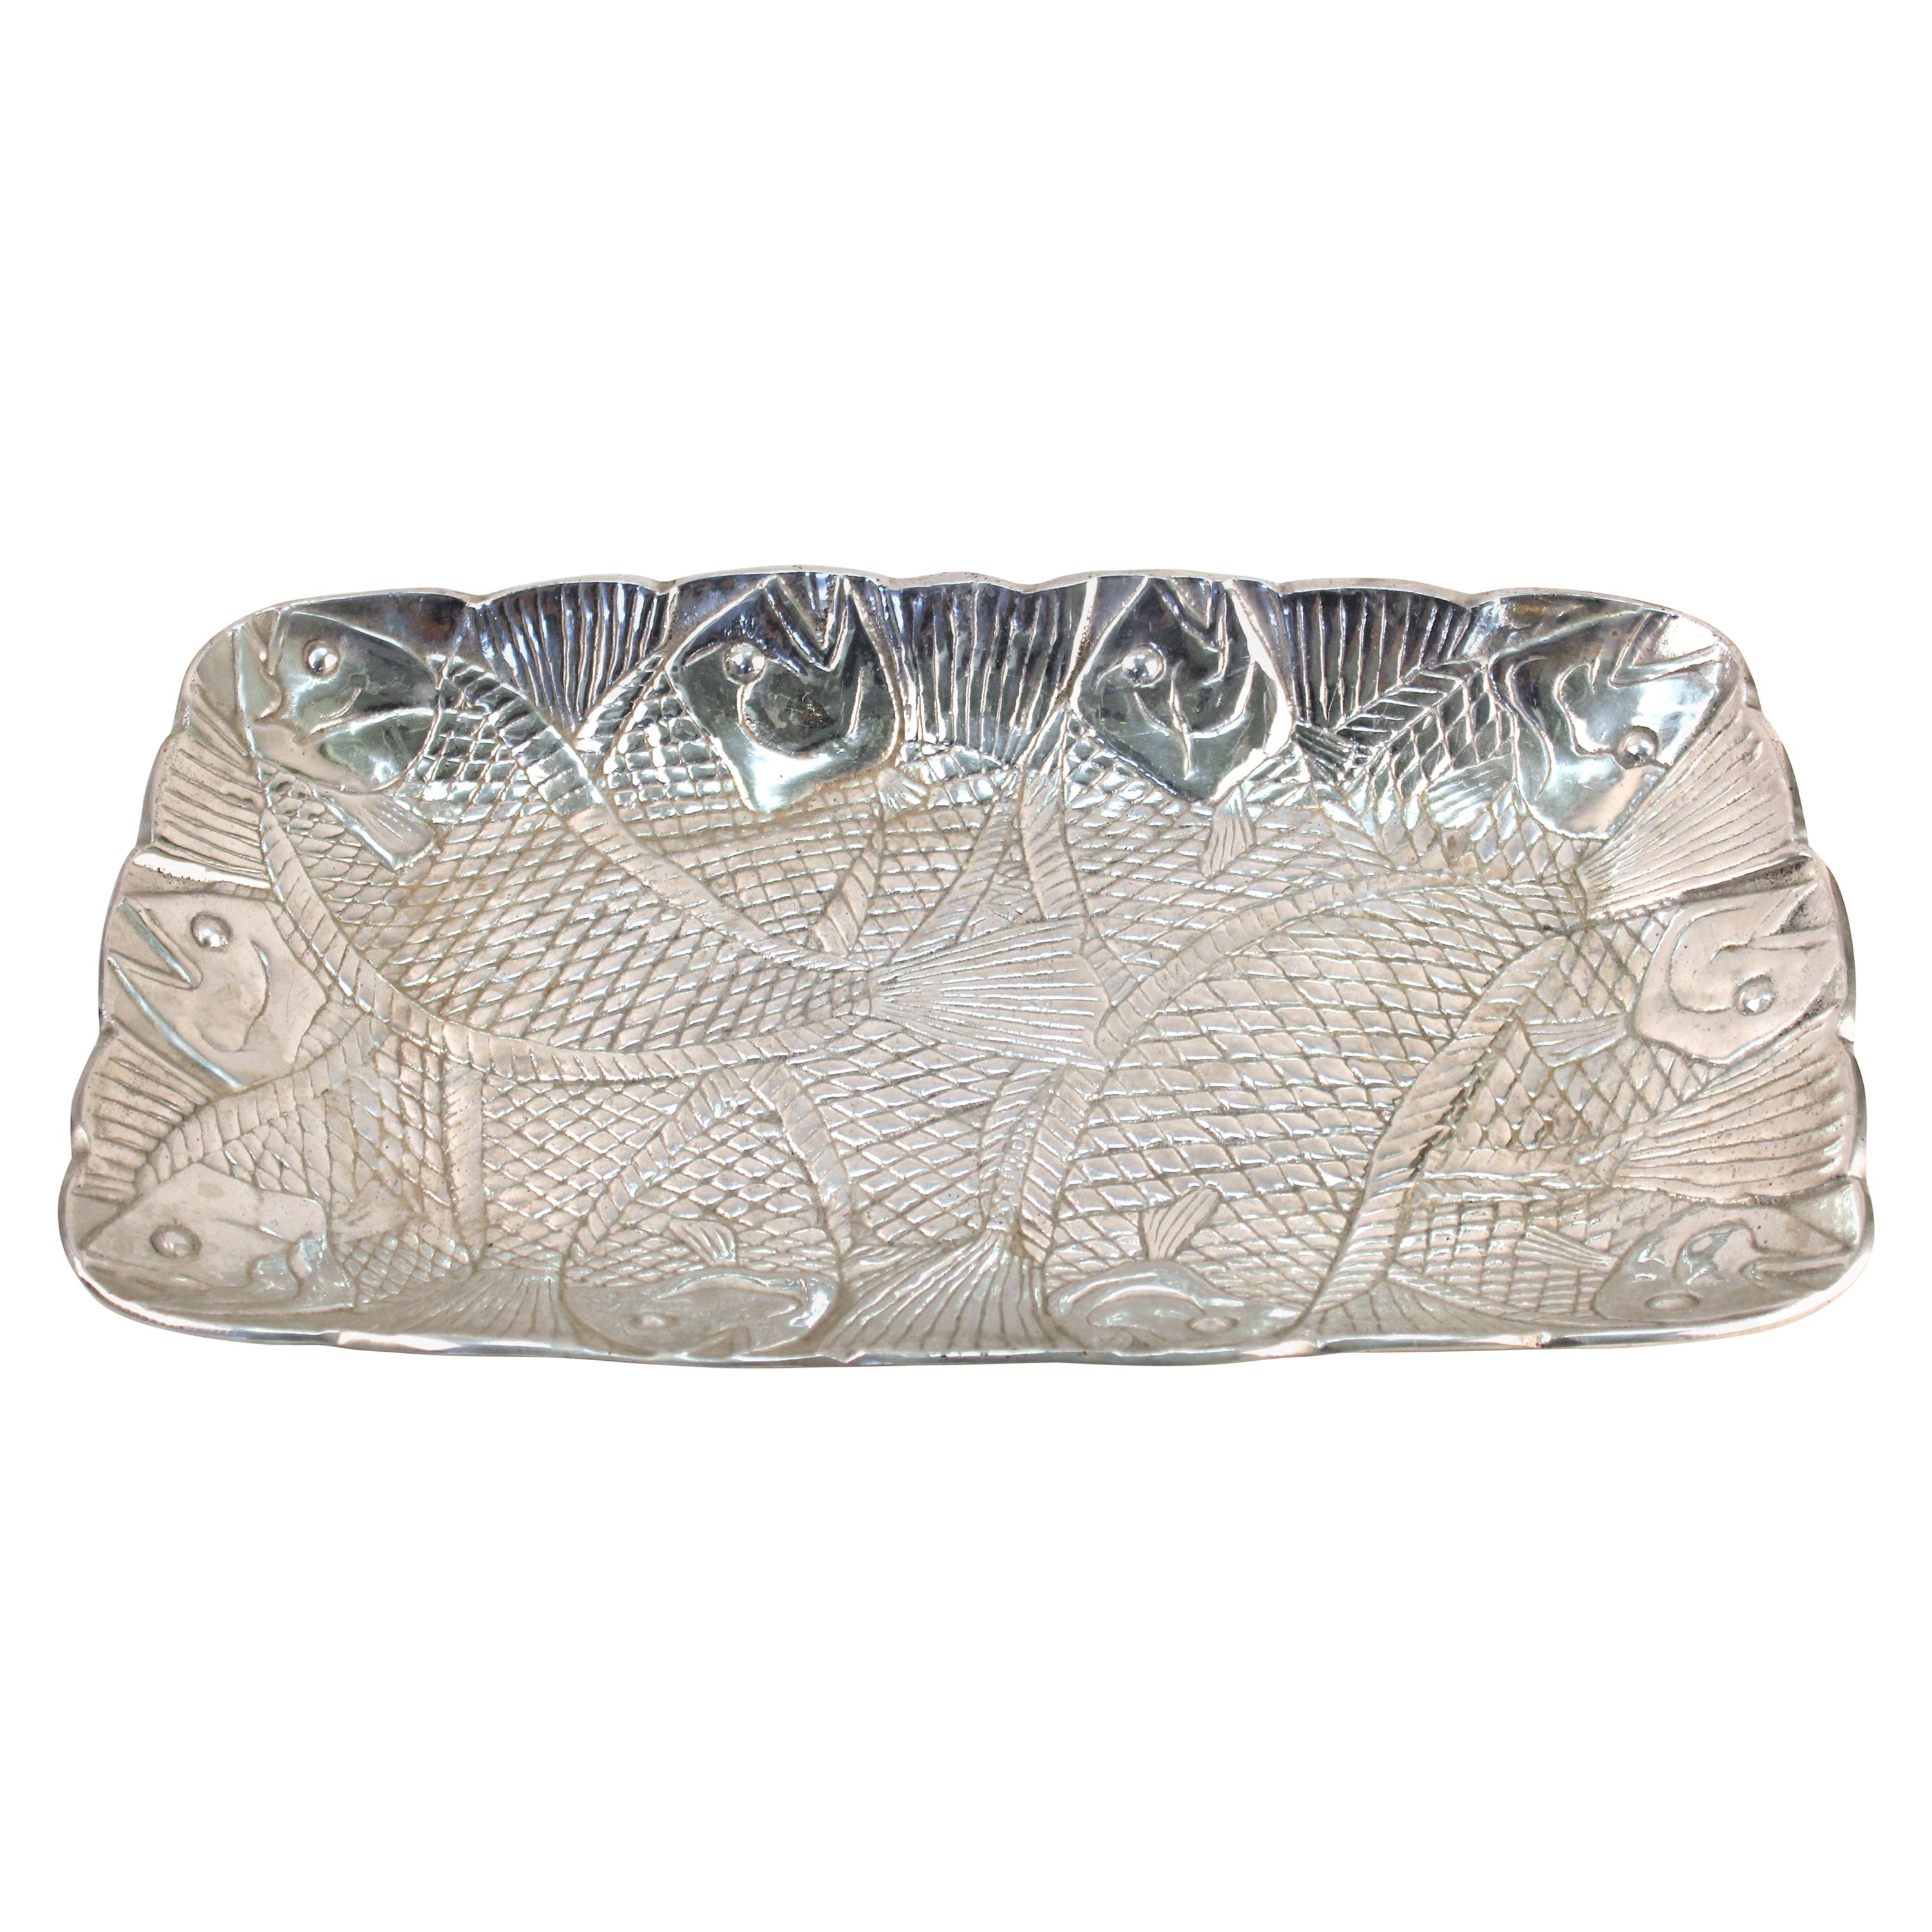 Modern Arthur Court Style Aluminum Serving Tray with Fish Theme